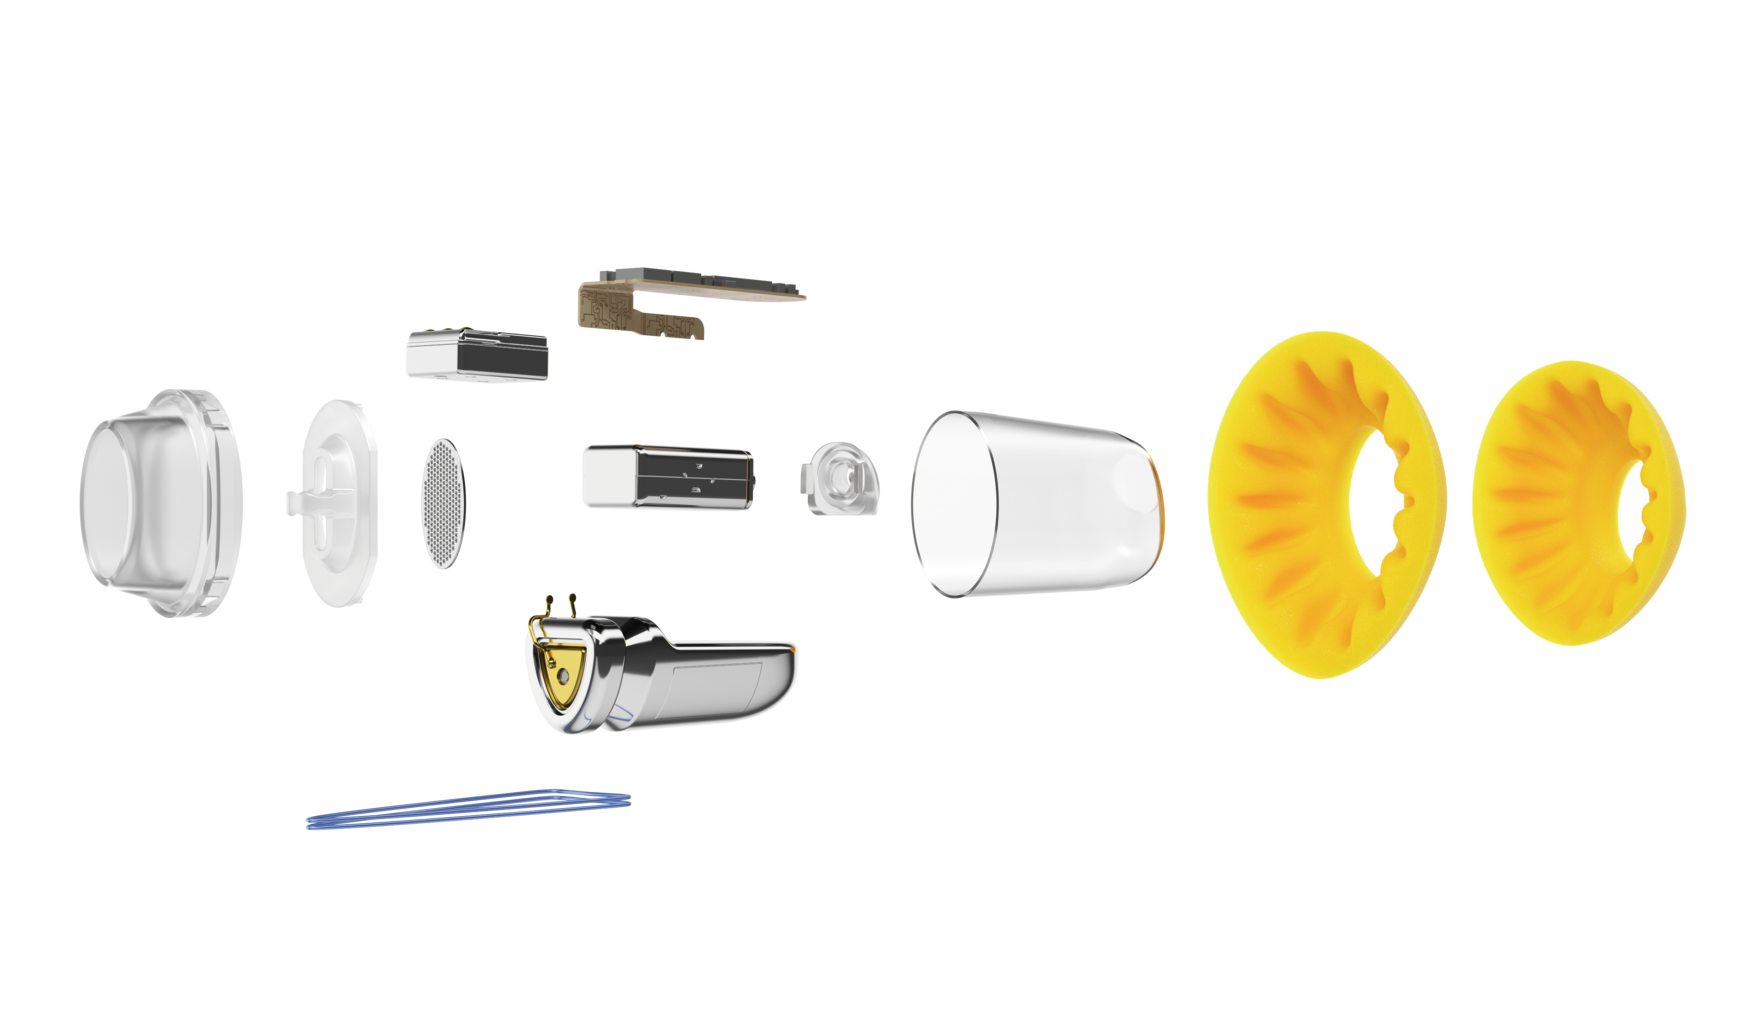 Inside components of Lyric hearing aid